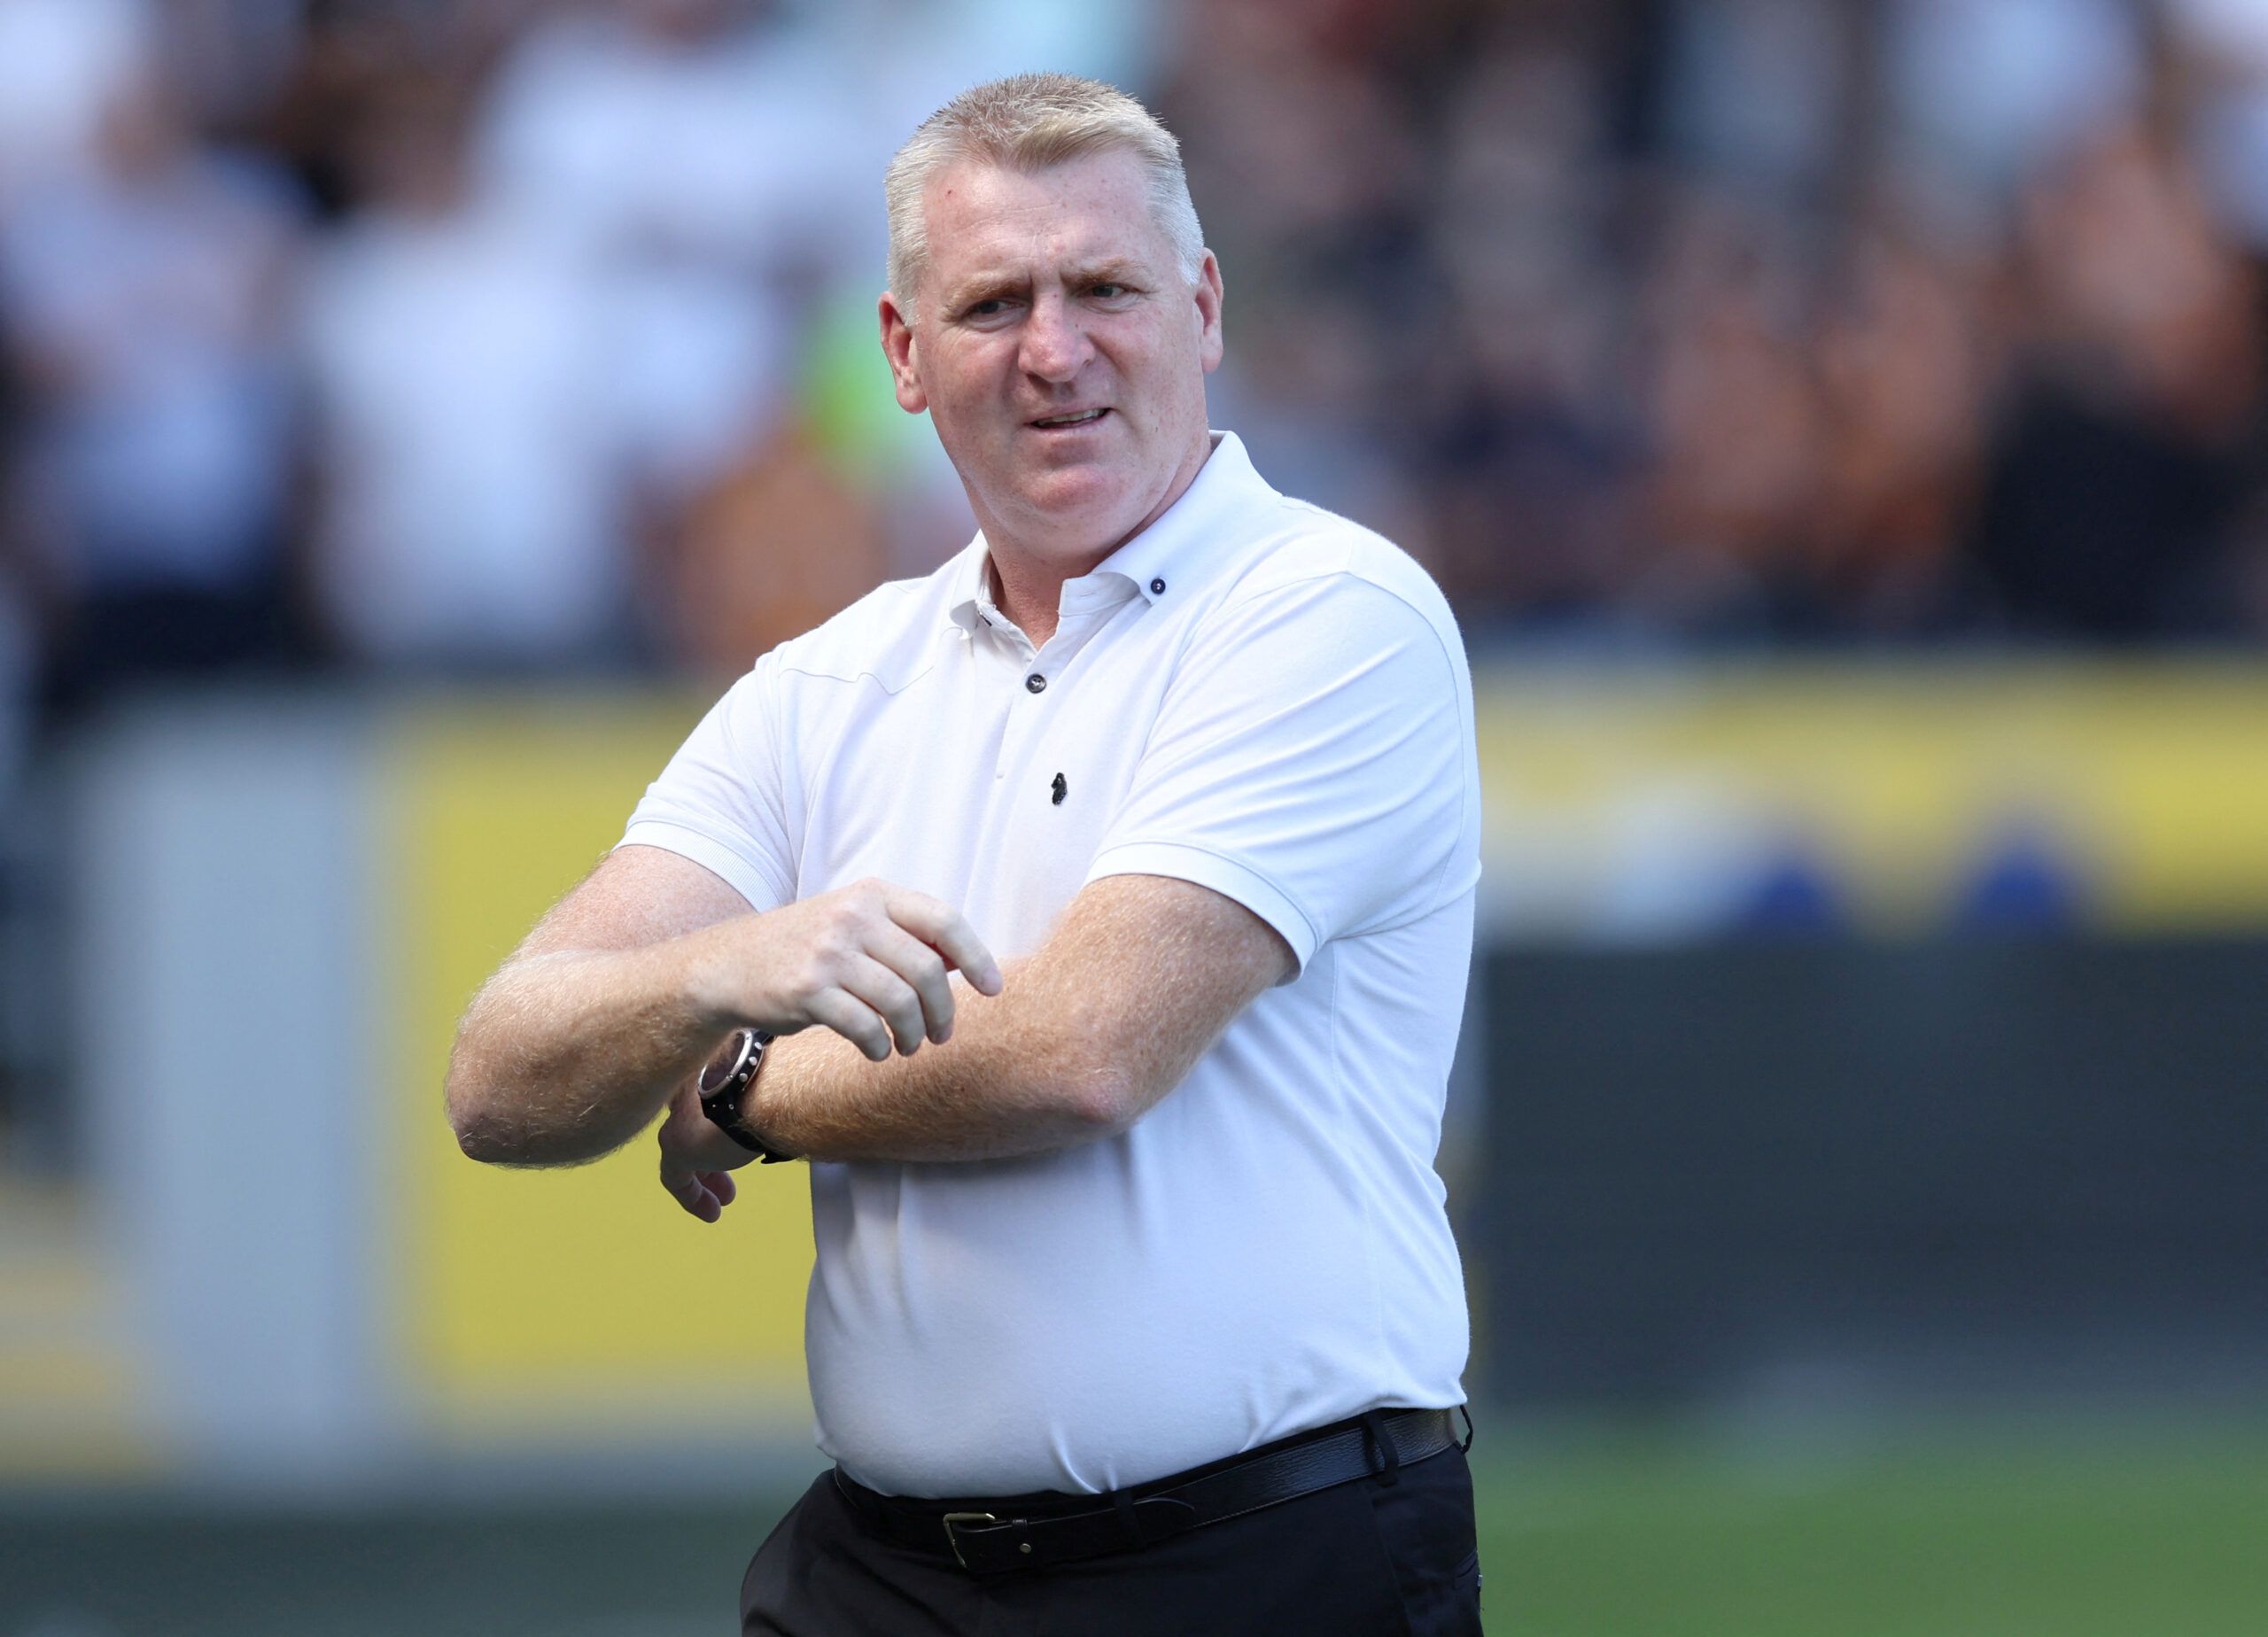 Soccer Football - Championship - Hull City v Norwich City - MKM Stadium, Hull, Britain - August 13, 2022 Norwich City manager Dean Smith reacts Action Images/John Clifton  EDITORIAL USE ONLY. No use with unauthorized audio, video, data, fixture lists, club/league logos or 